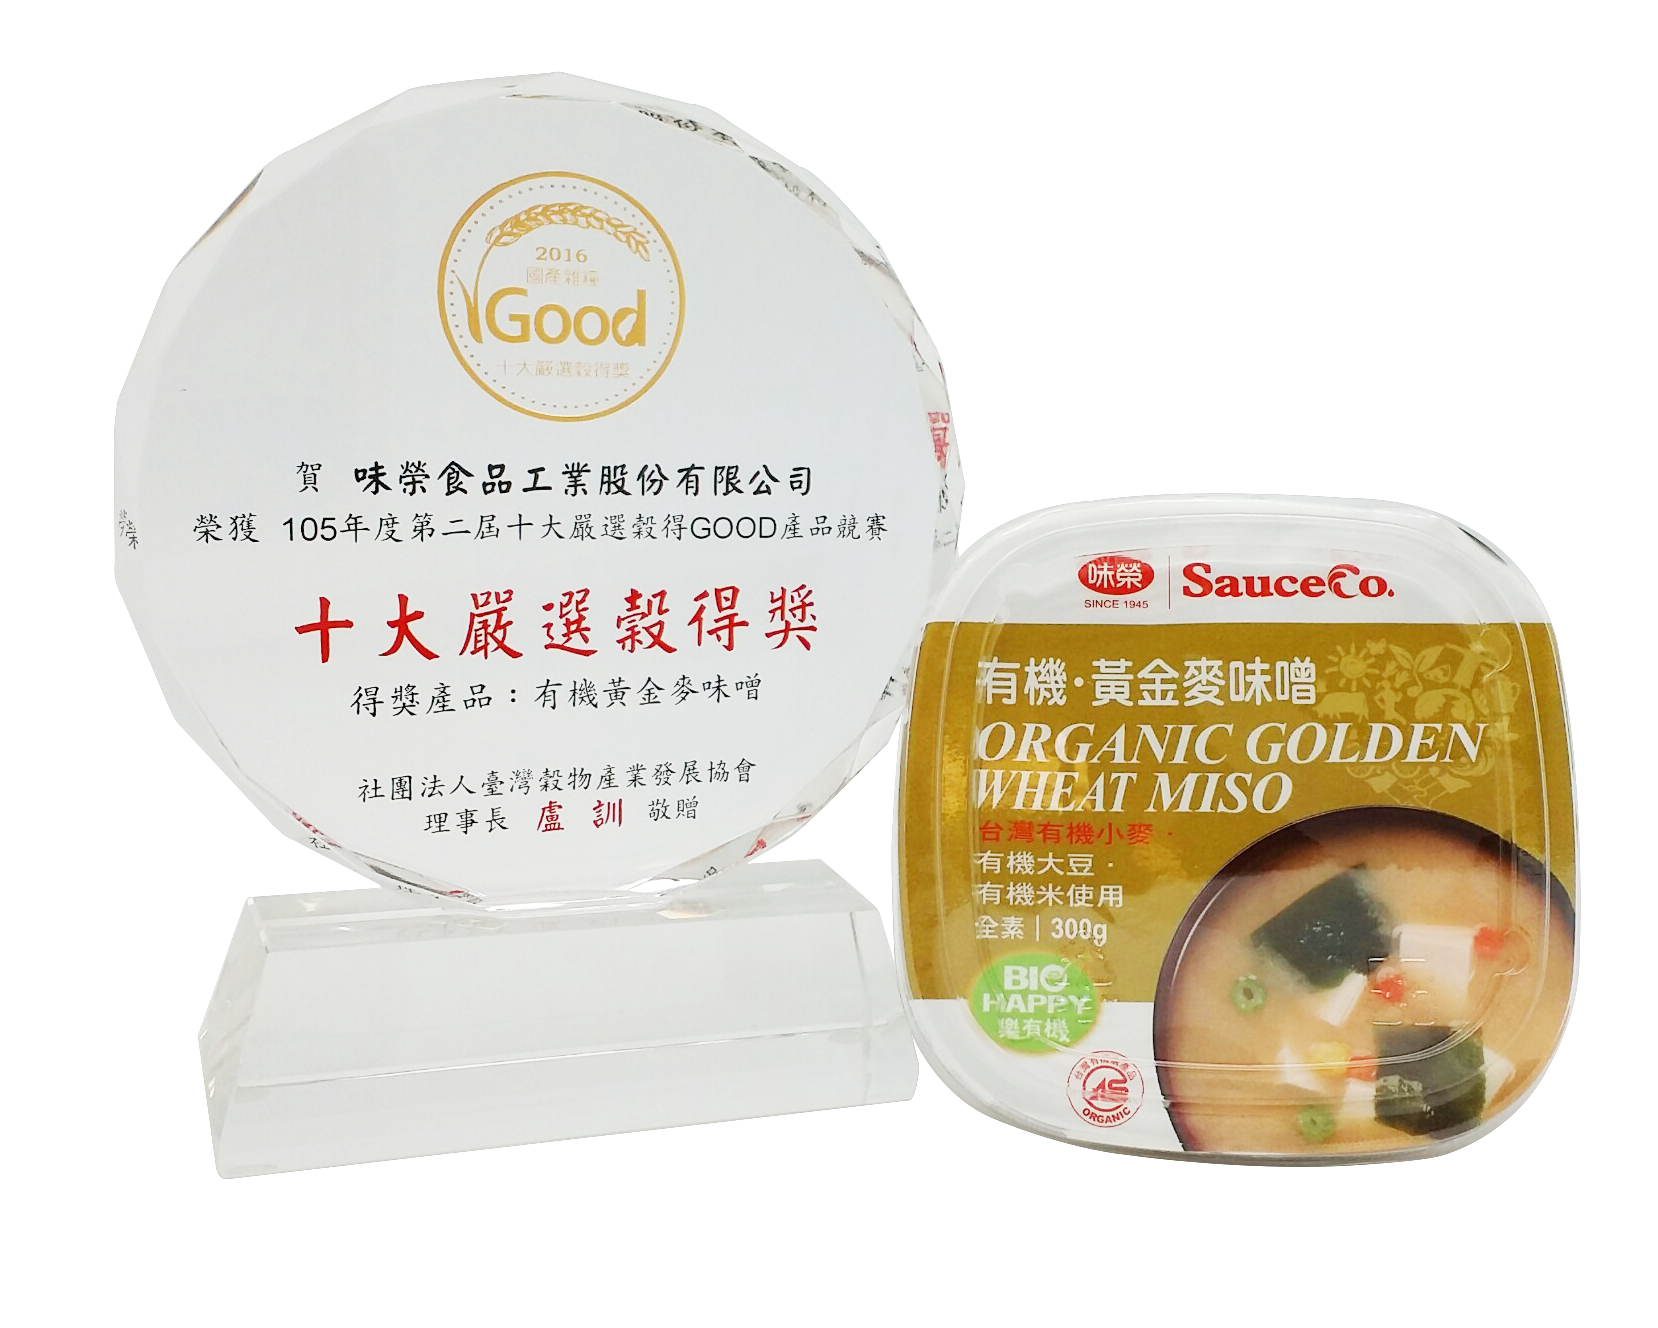 [Organic Golden Wheat Miso] passed the evaluation of the Agricultural and Food Administration of the Executive Yuan Committee of Agriculture and was selected as the second "Top Ten Strictly Selected Good Valley Award Winners" in 2016